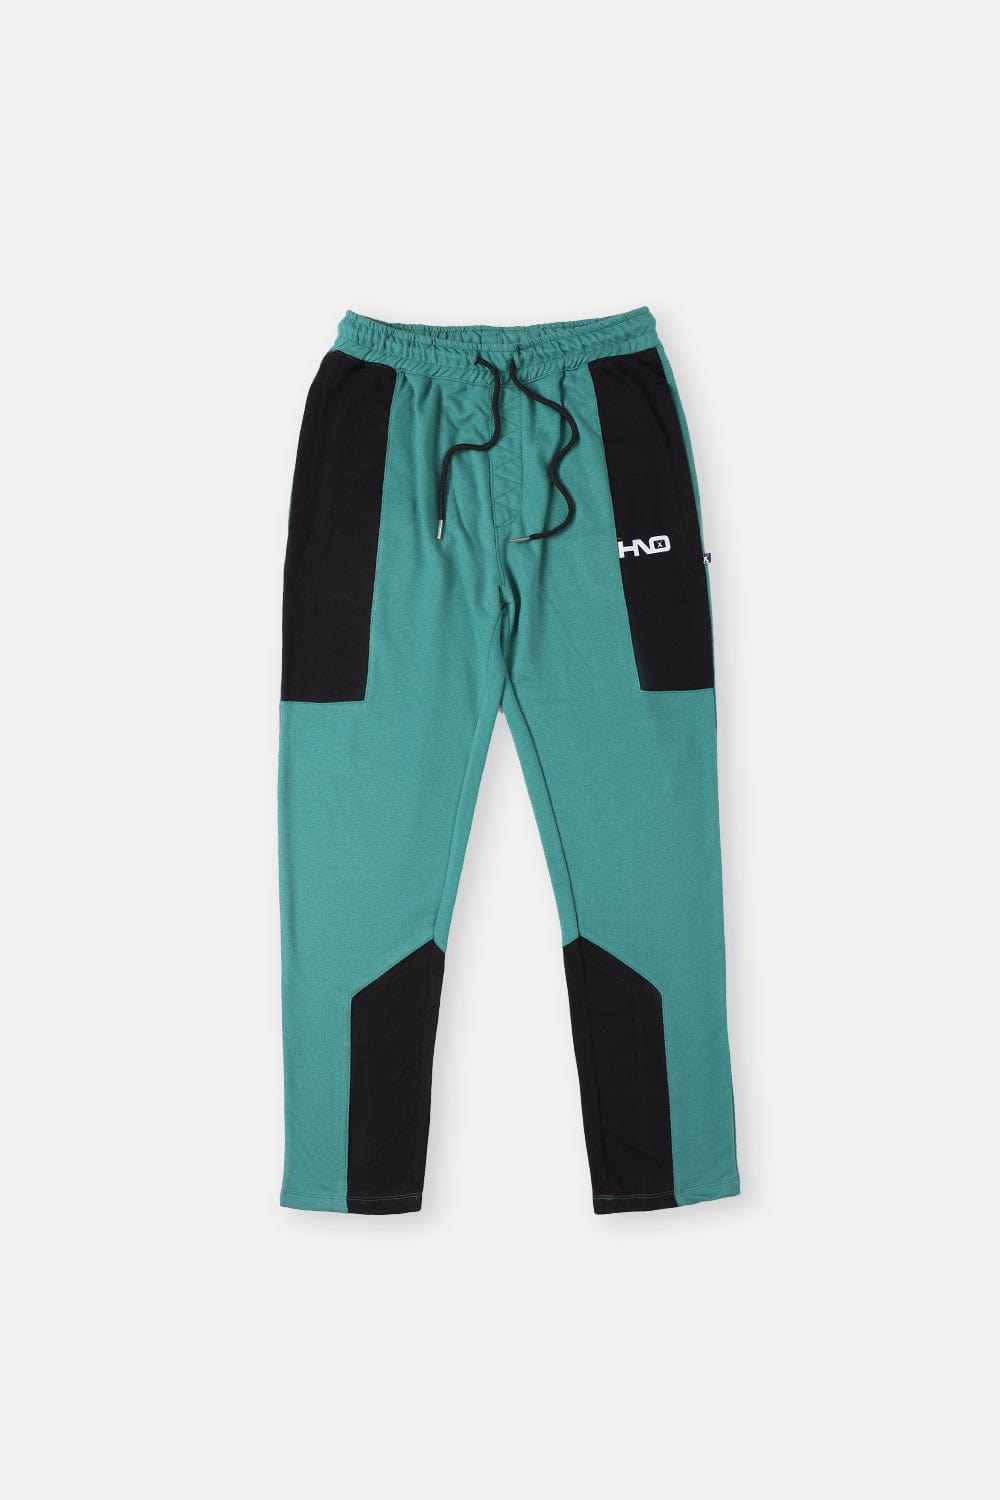 Hope Not Out by Shahid Afridi Men Trouser Sea Green Trouser With Navy Panels